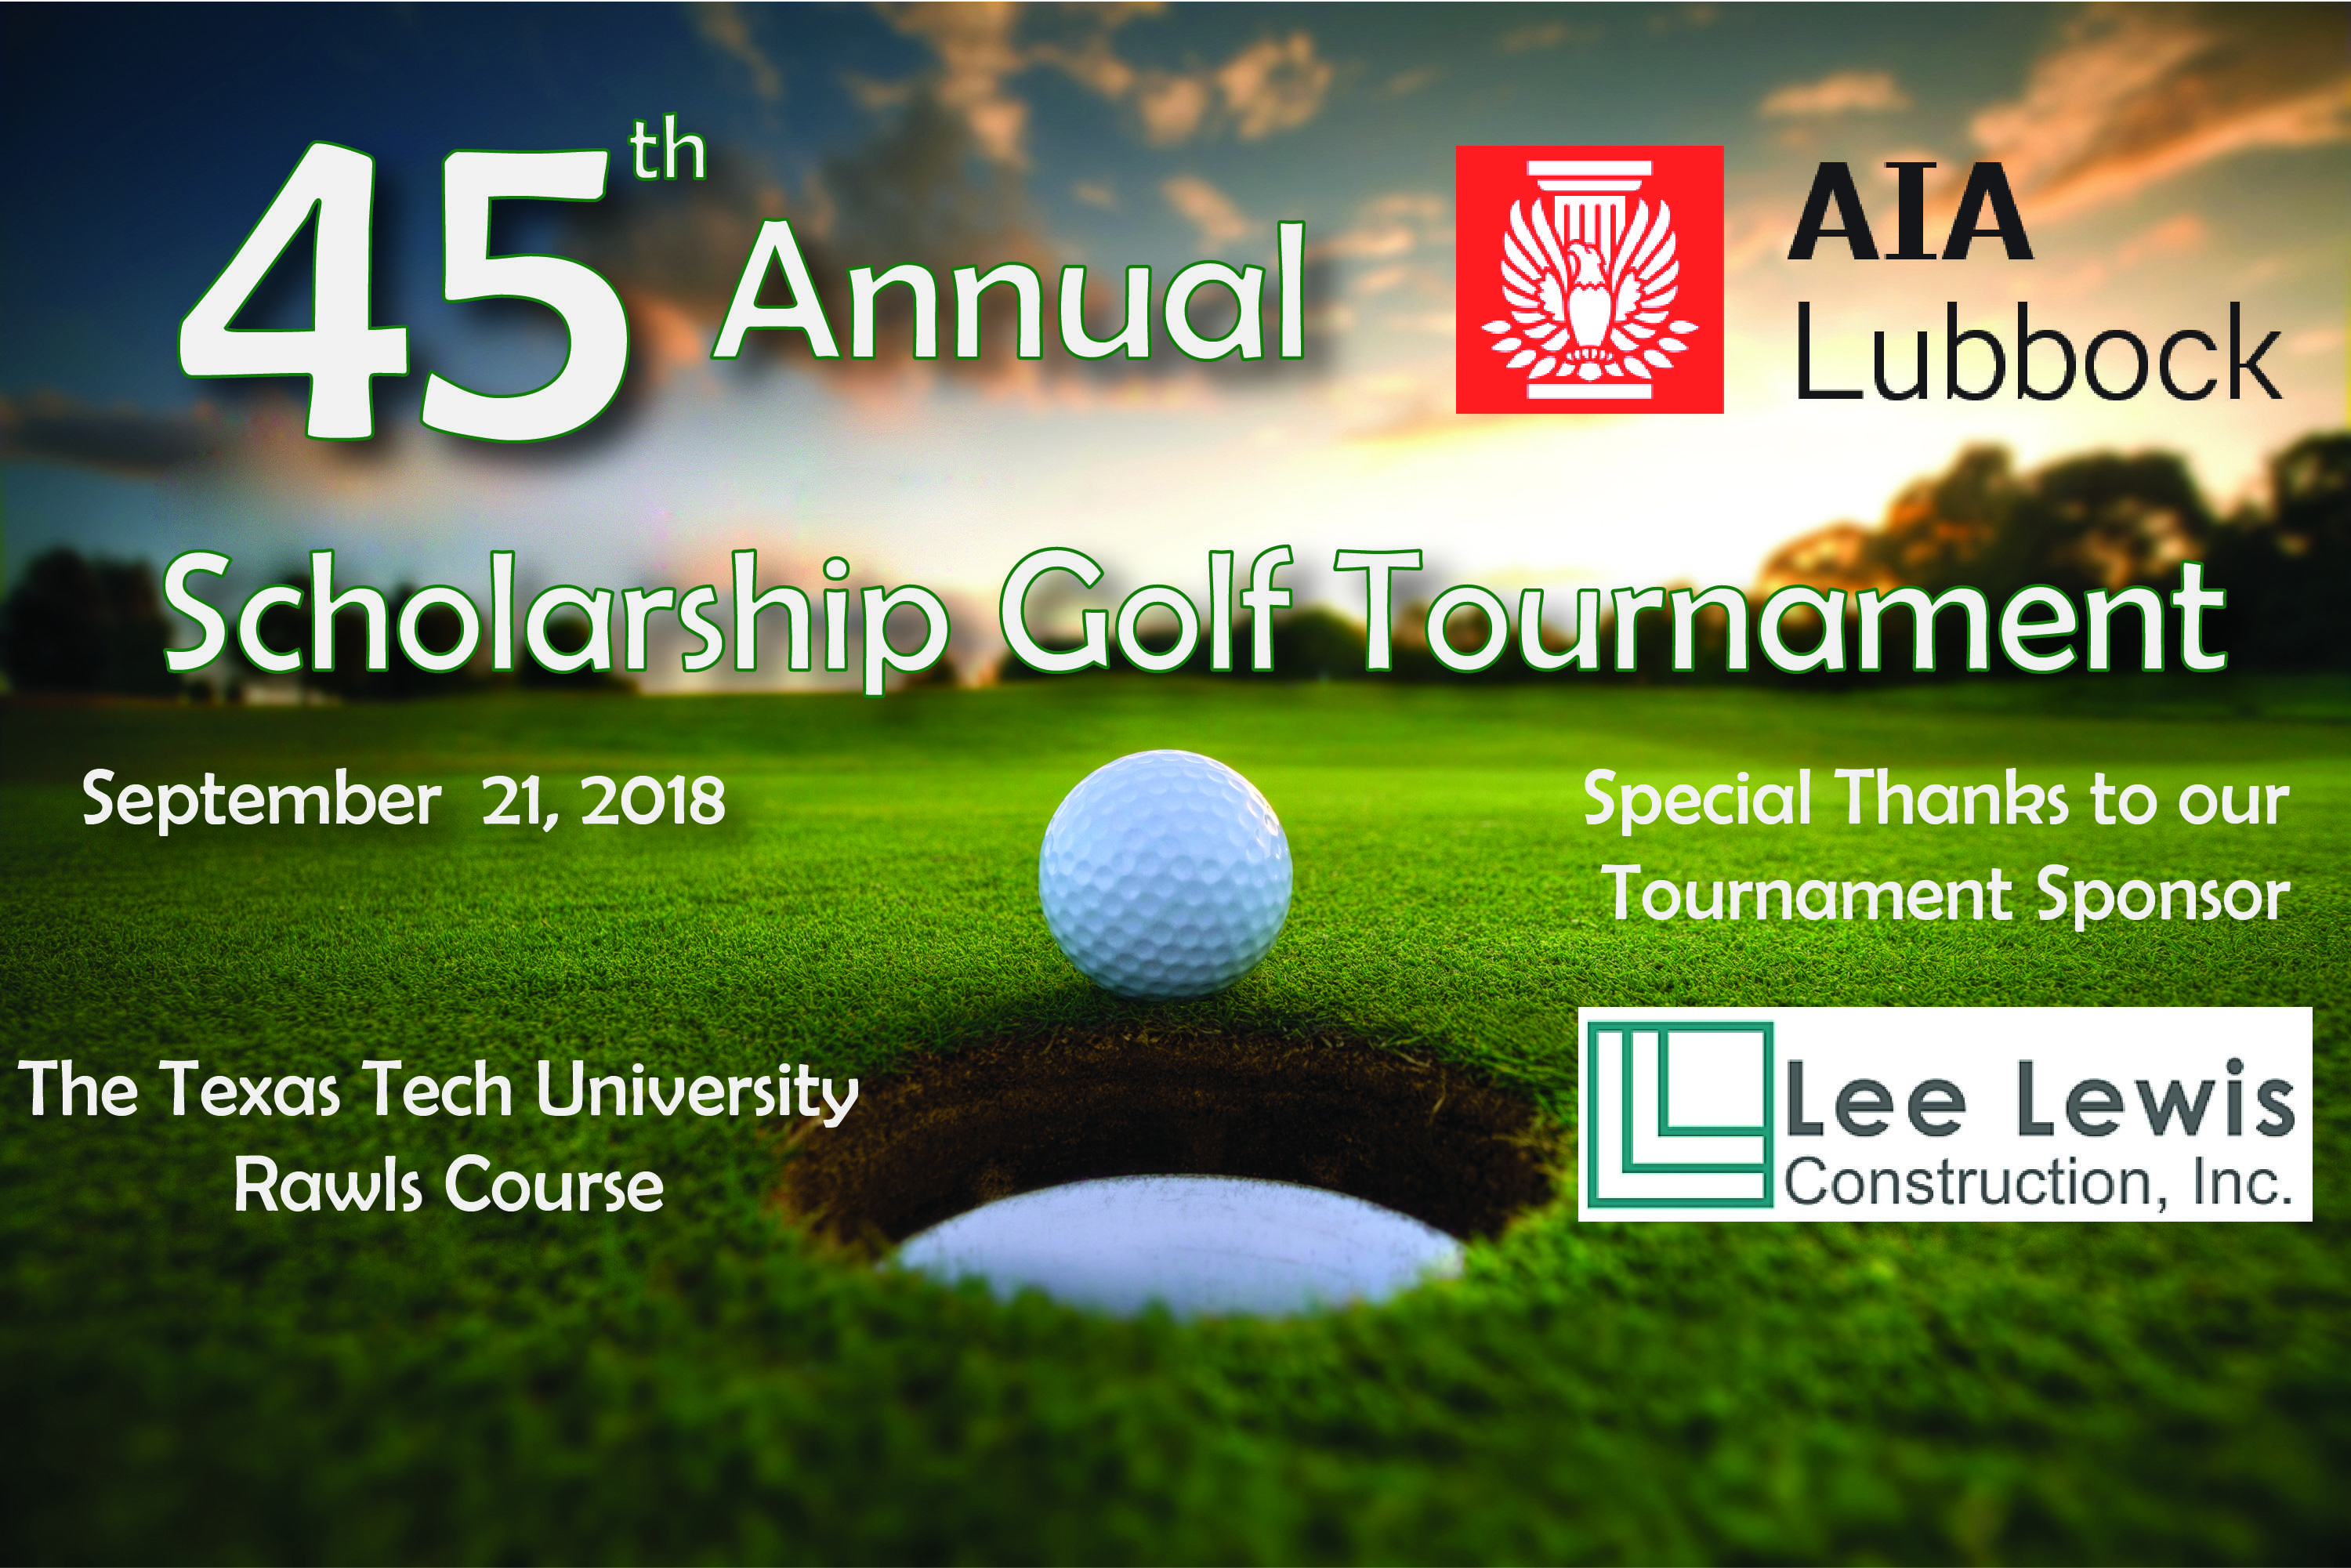 AIA Lubbock's 45th Annual Scholarship Golf Tournament